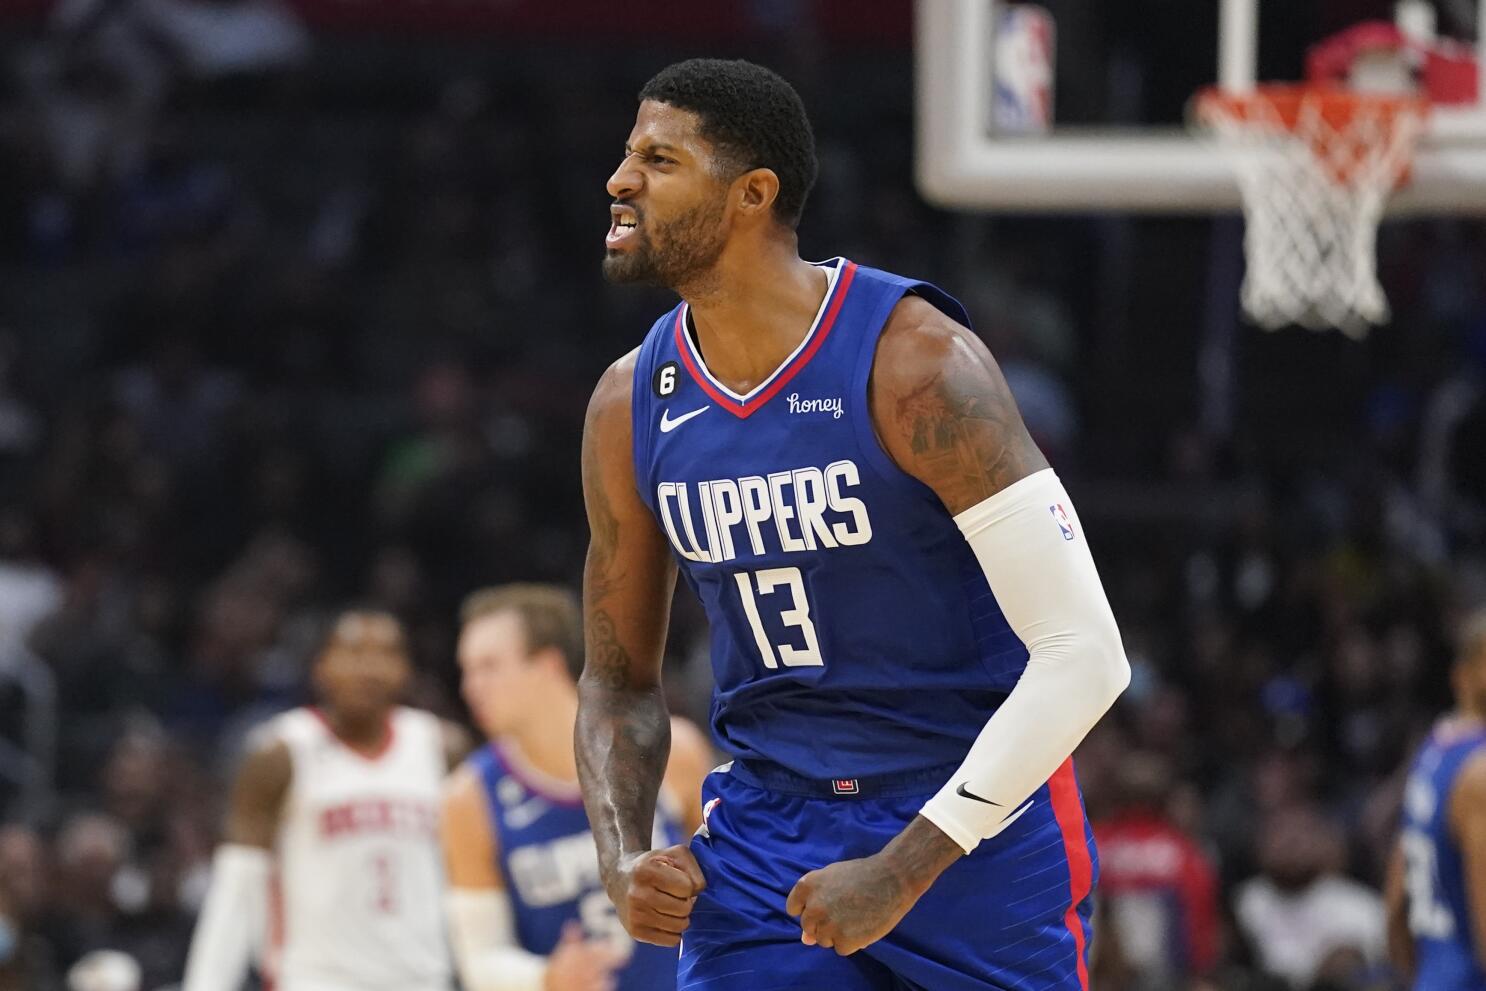 Paul George's jumper lifts Clippers over Rockets, ends skid - Los